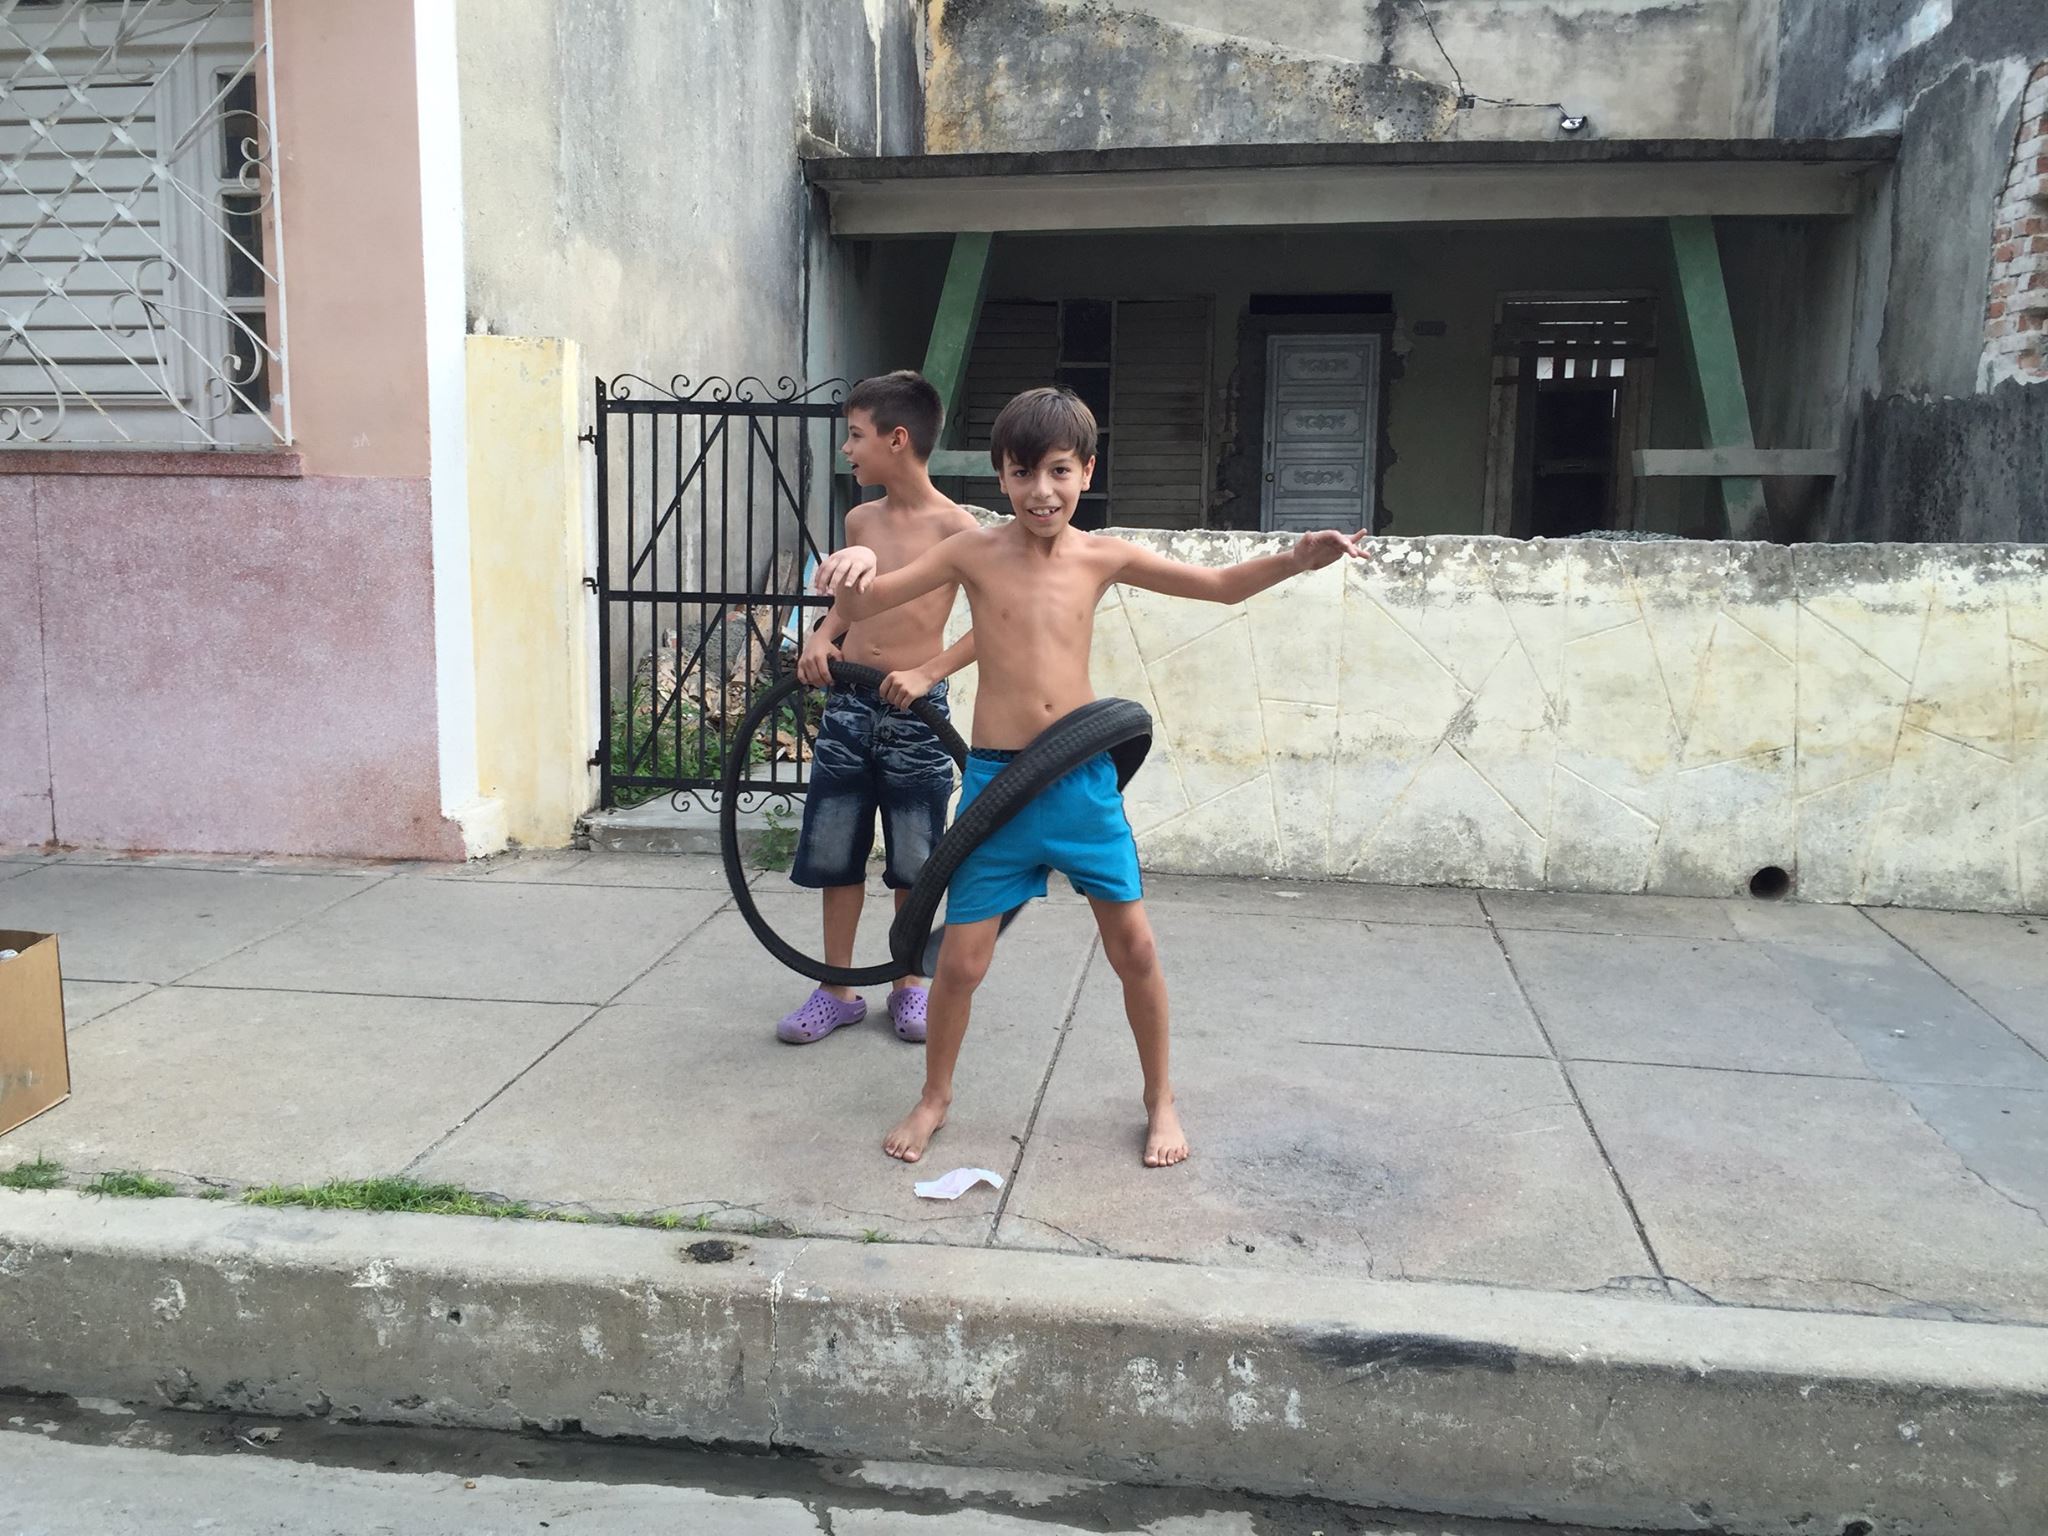   Poverty manifests in so many ways. The happiness of these kids hoola hooping with tires is emblematic of Cuba.  